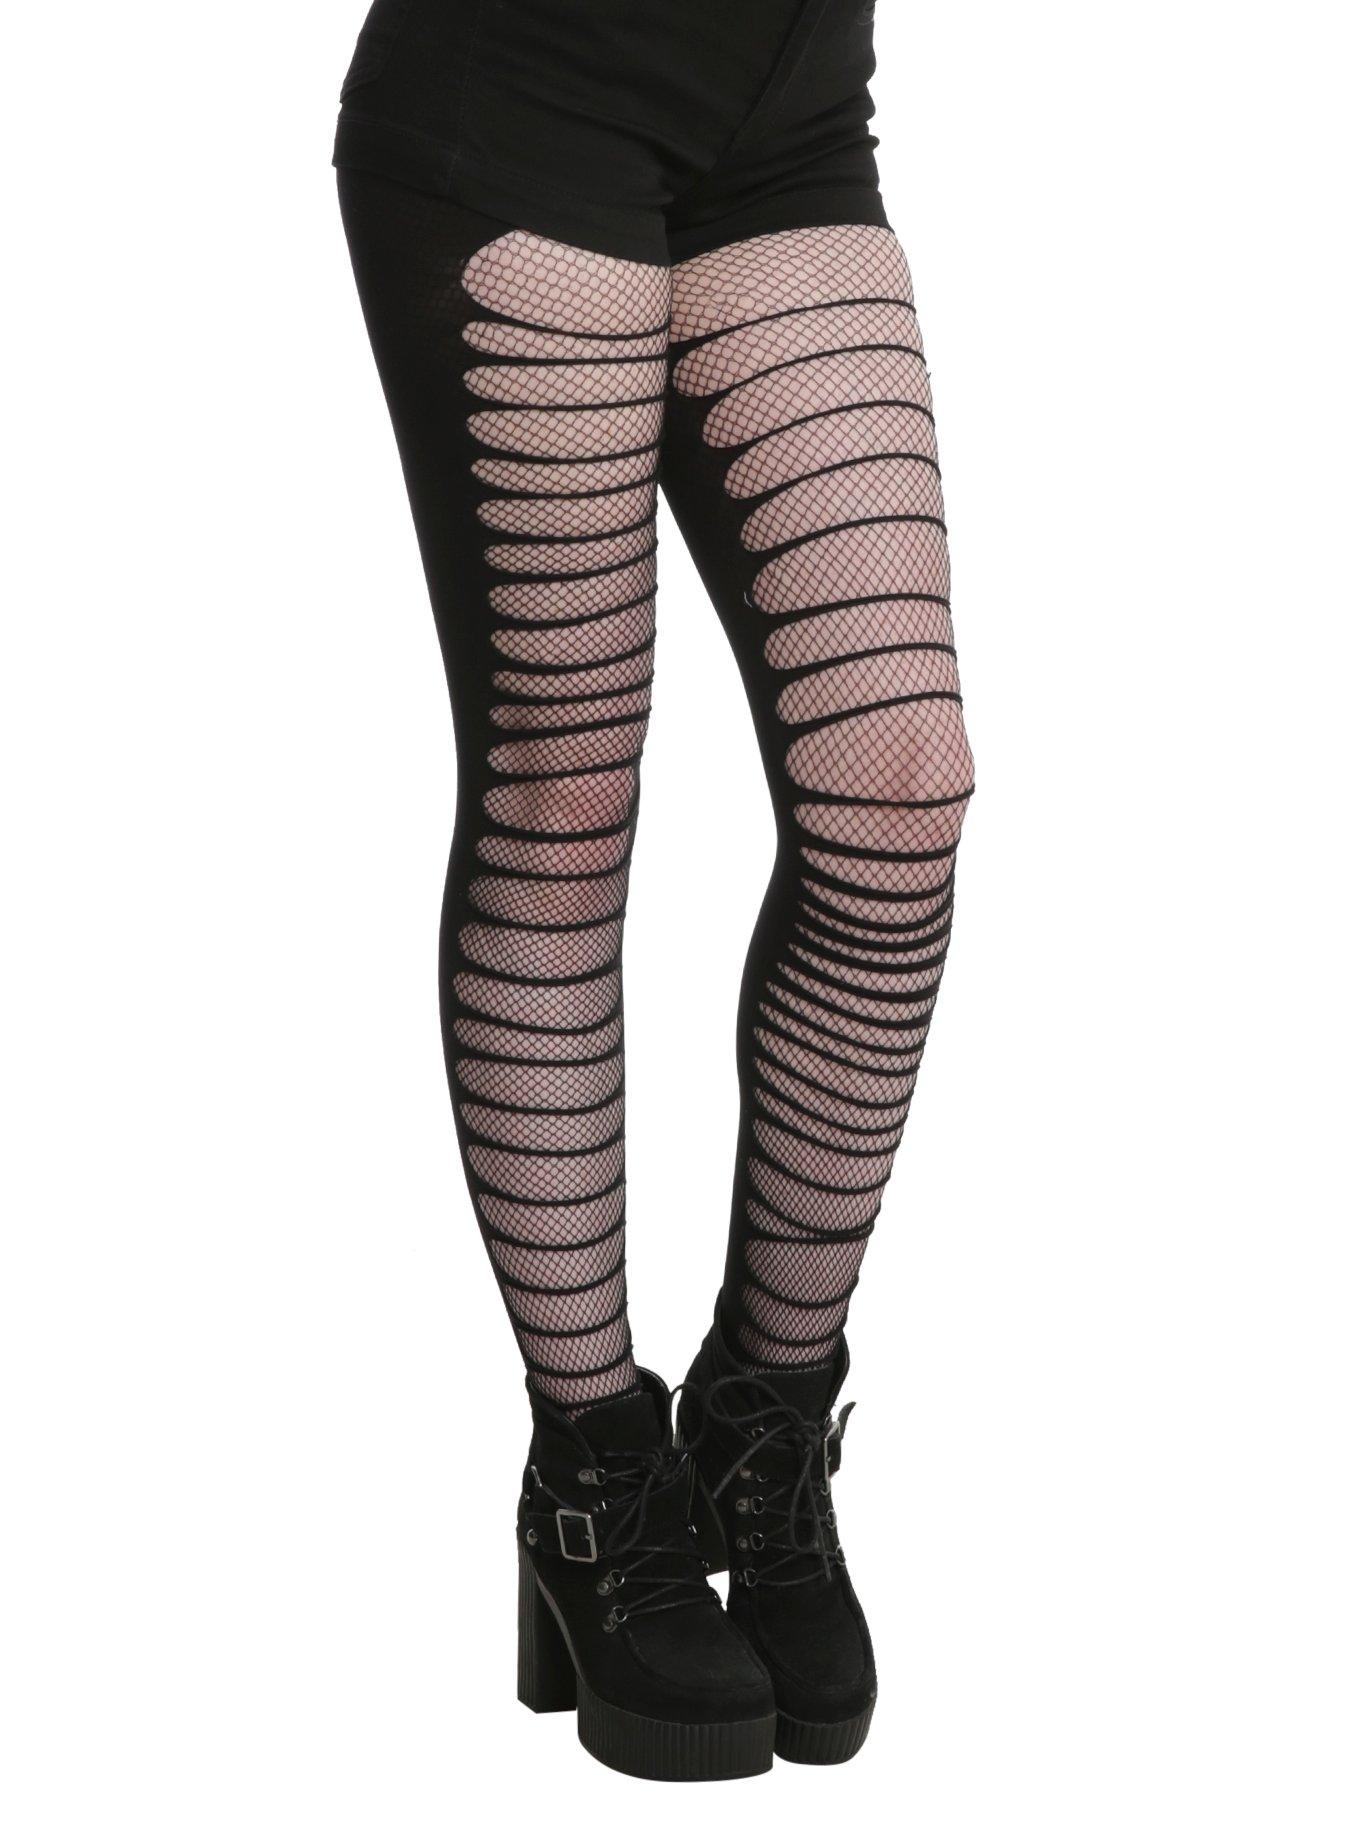 Black Double Layer Shredded Fishnet Tights